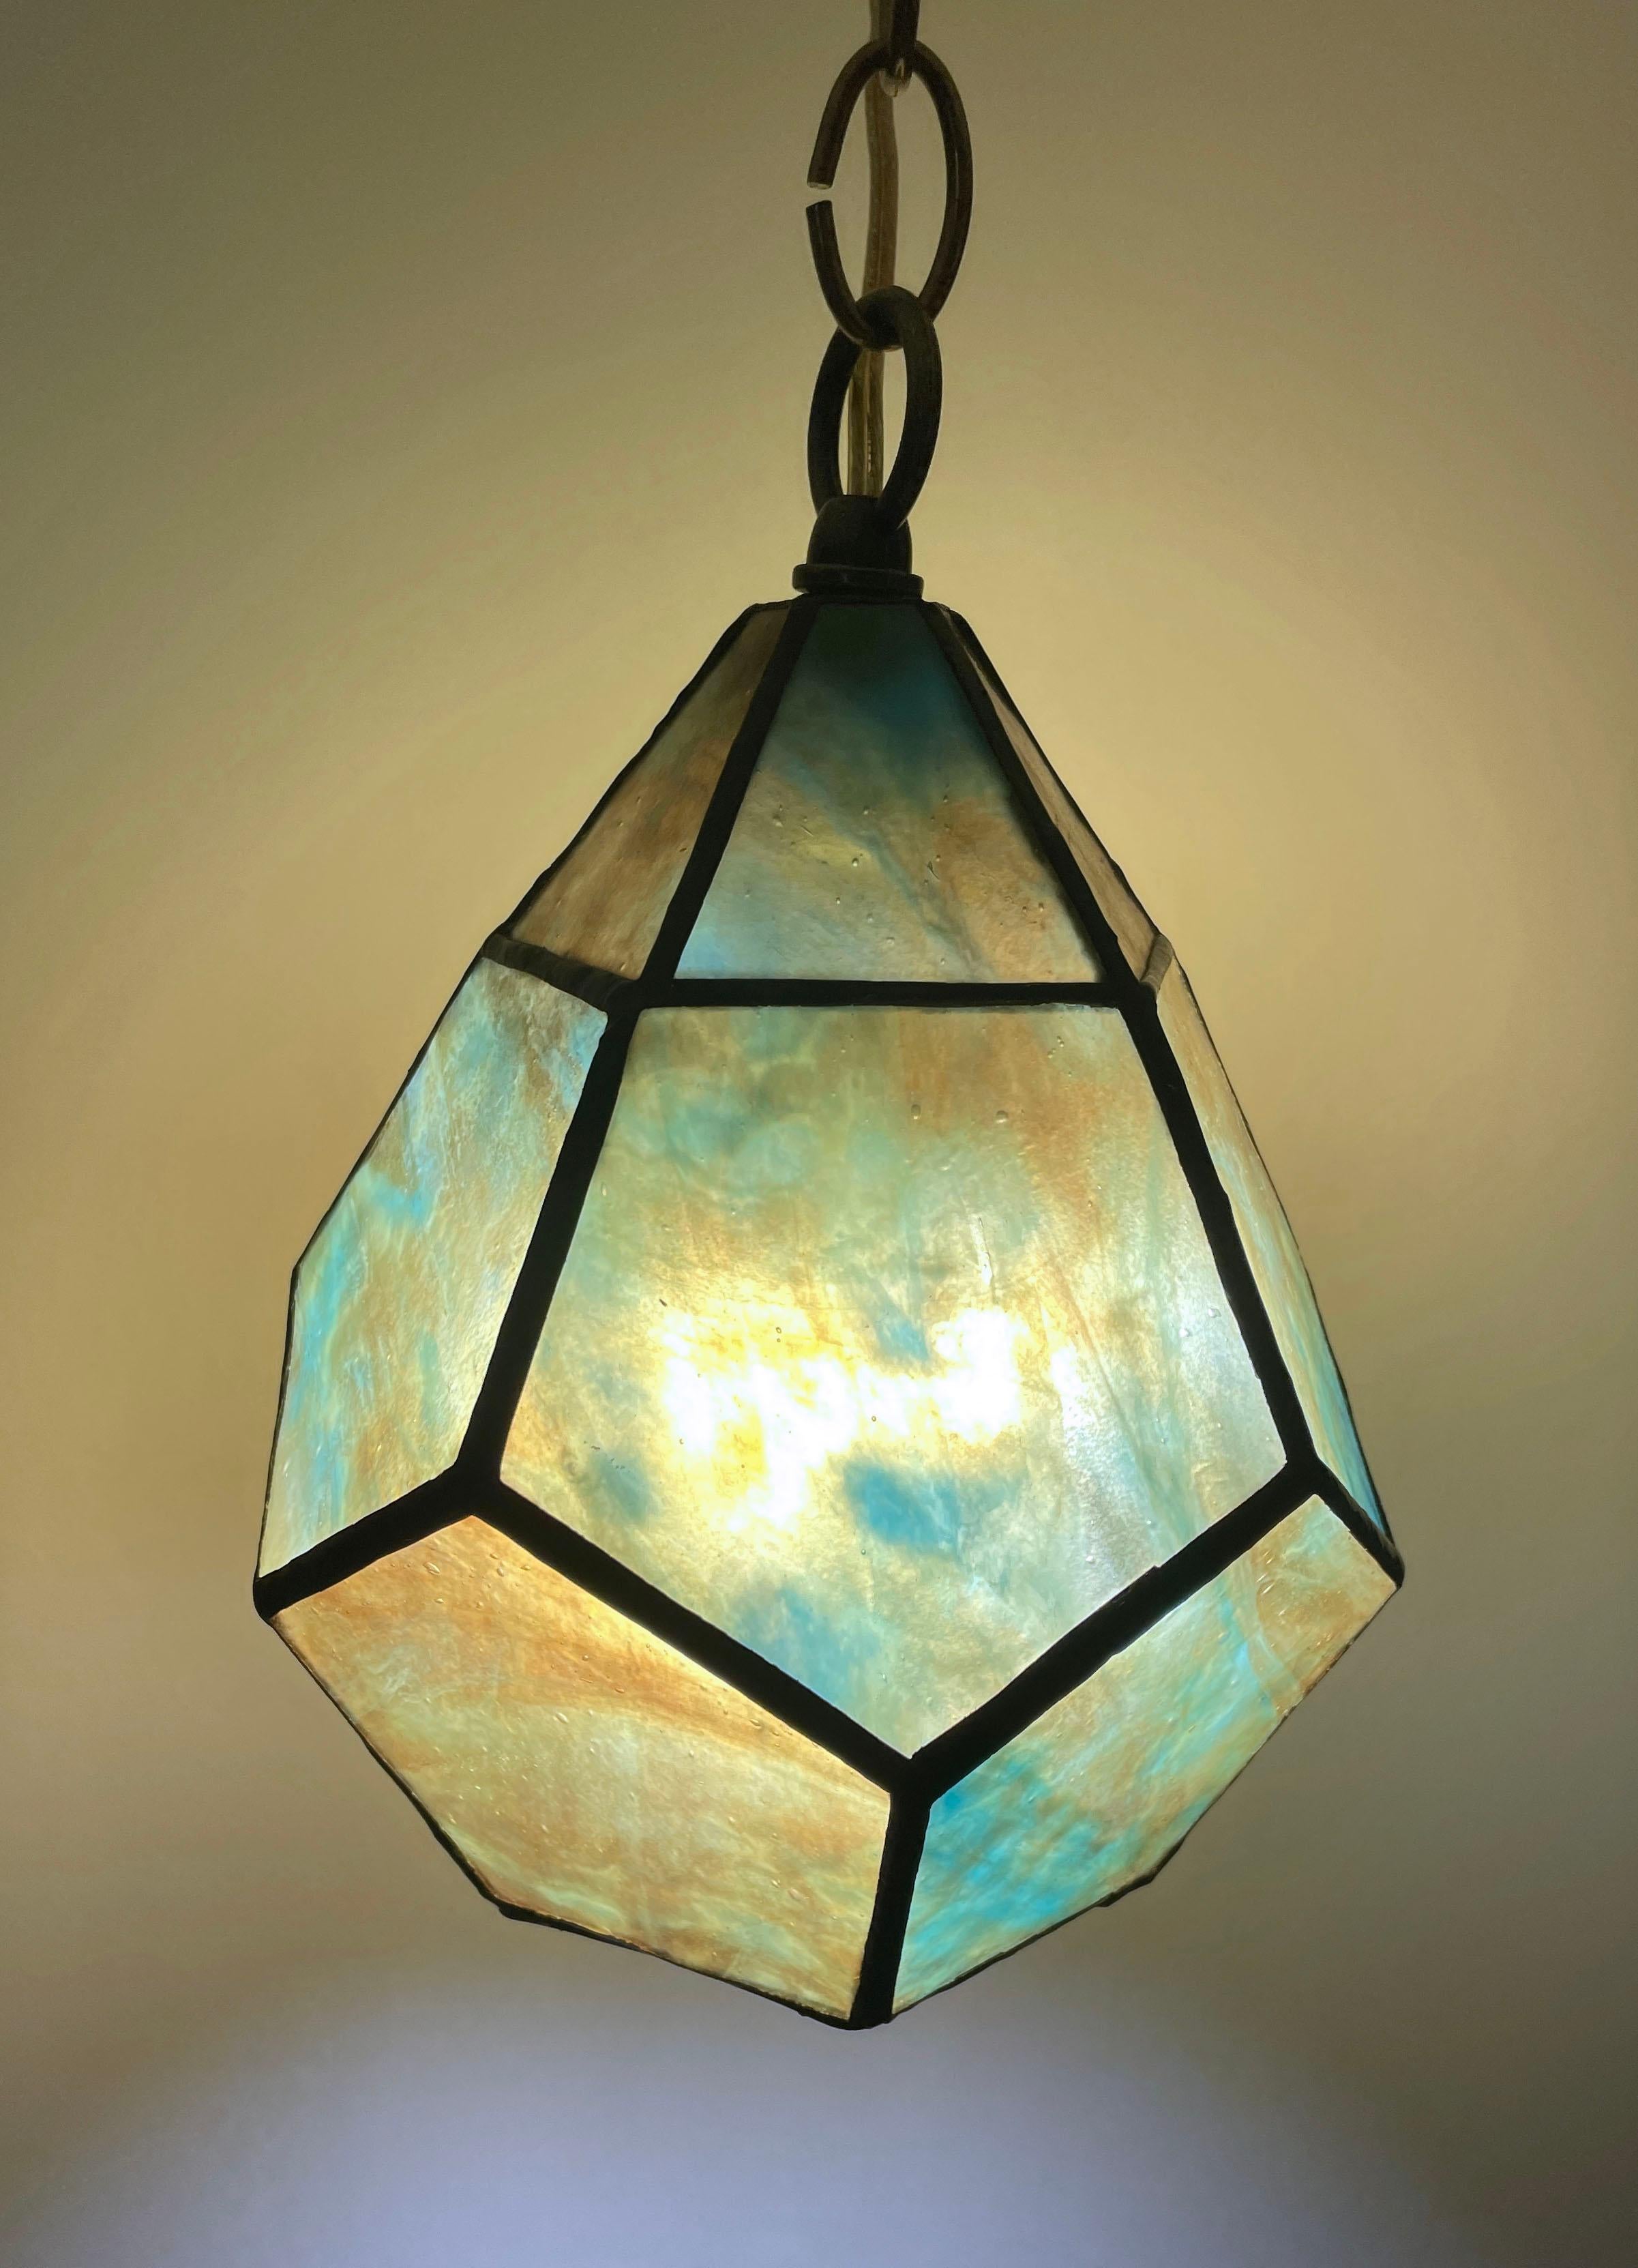 Handcrafted stained glass ceiling lamp with brass hardware, decorators chain and 8ft wall plug with toggle switch. Turquoise and amber glass. Hängefertig.  Multiples available but each one is slightly unique by the hand made nature.  Please inquire